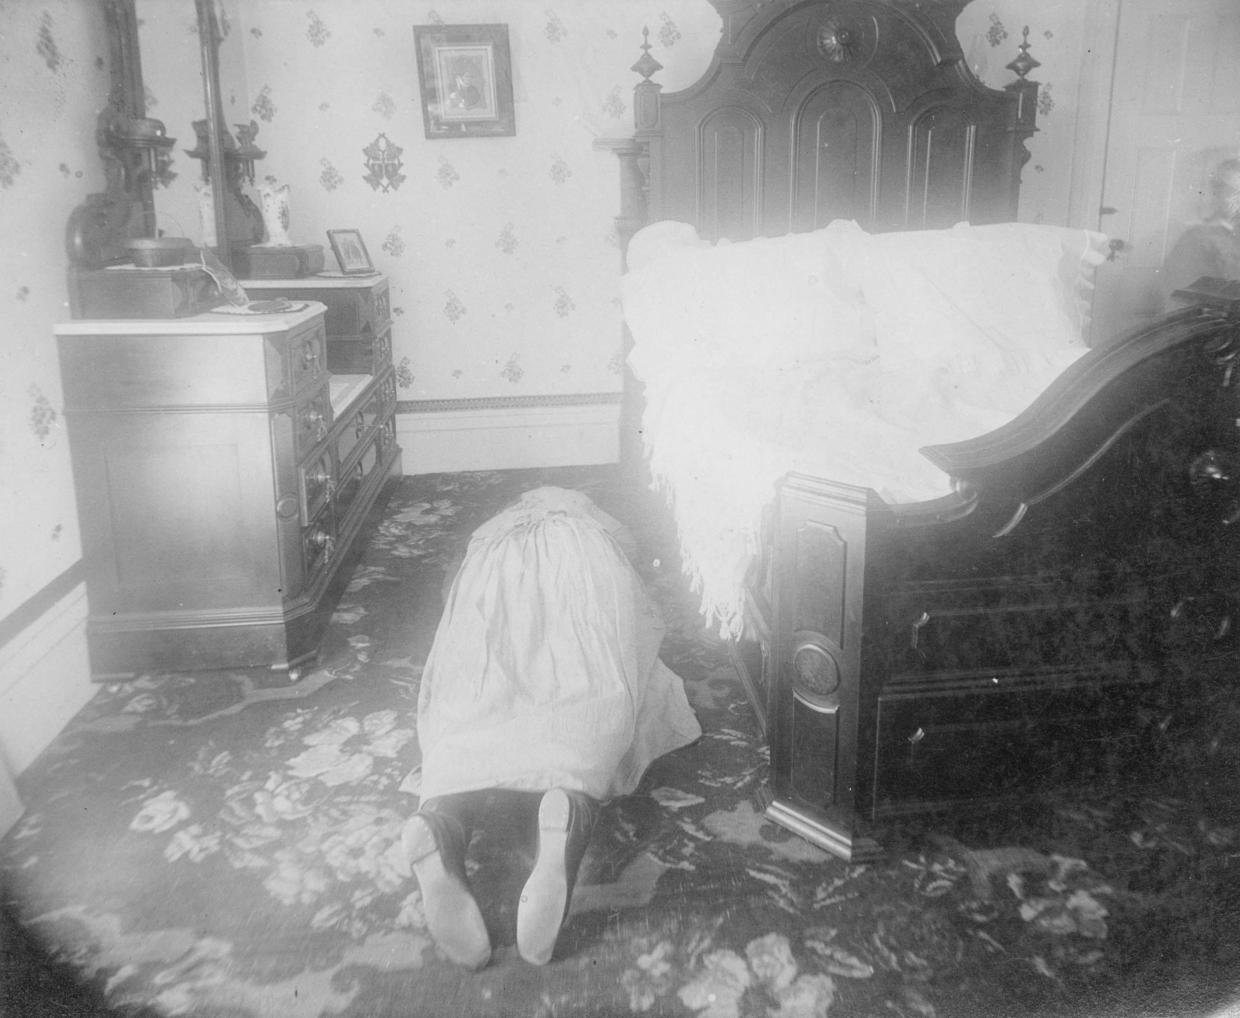 Lizzie Borden Case Images From One Of The Most Notorious Crime Scenes In History Cbs News 